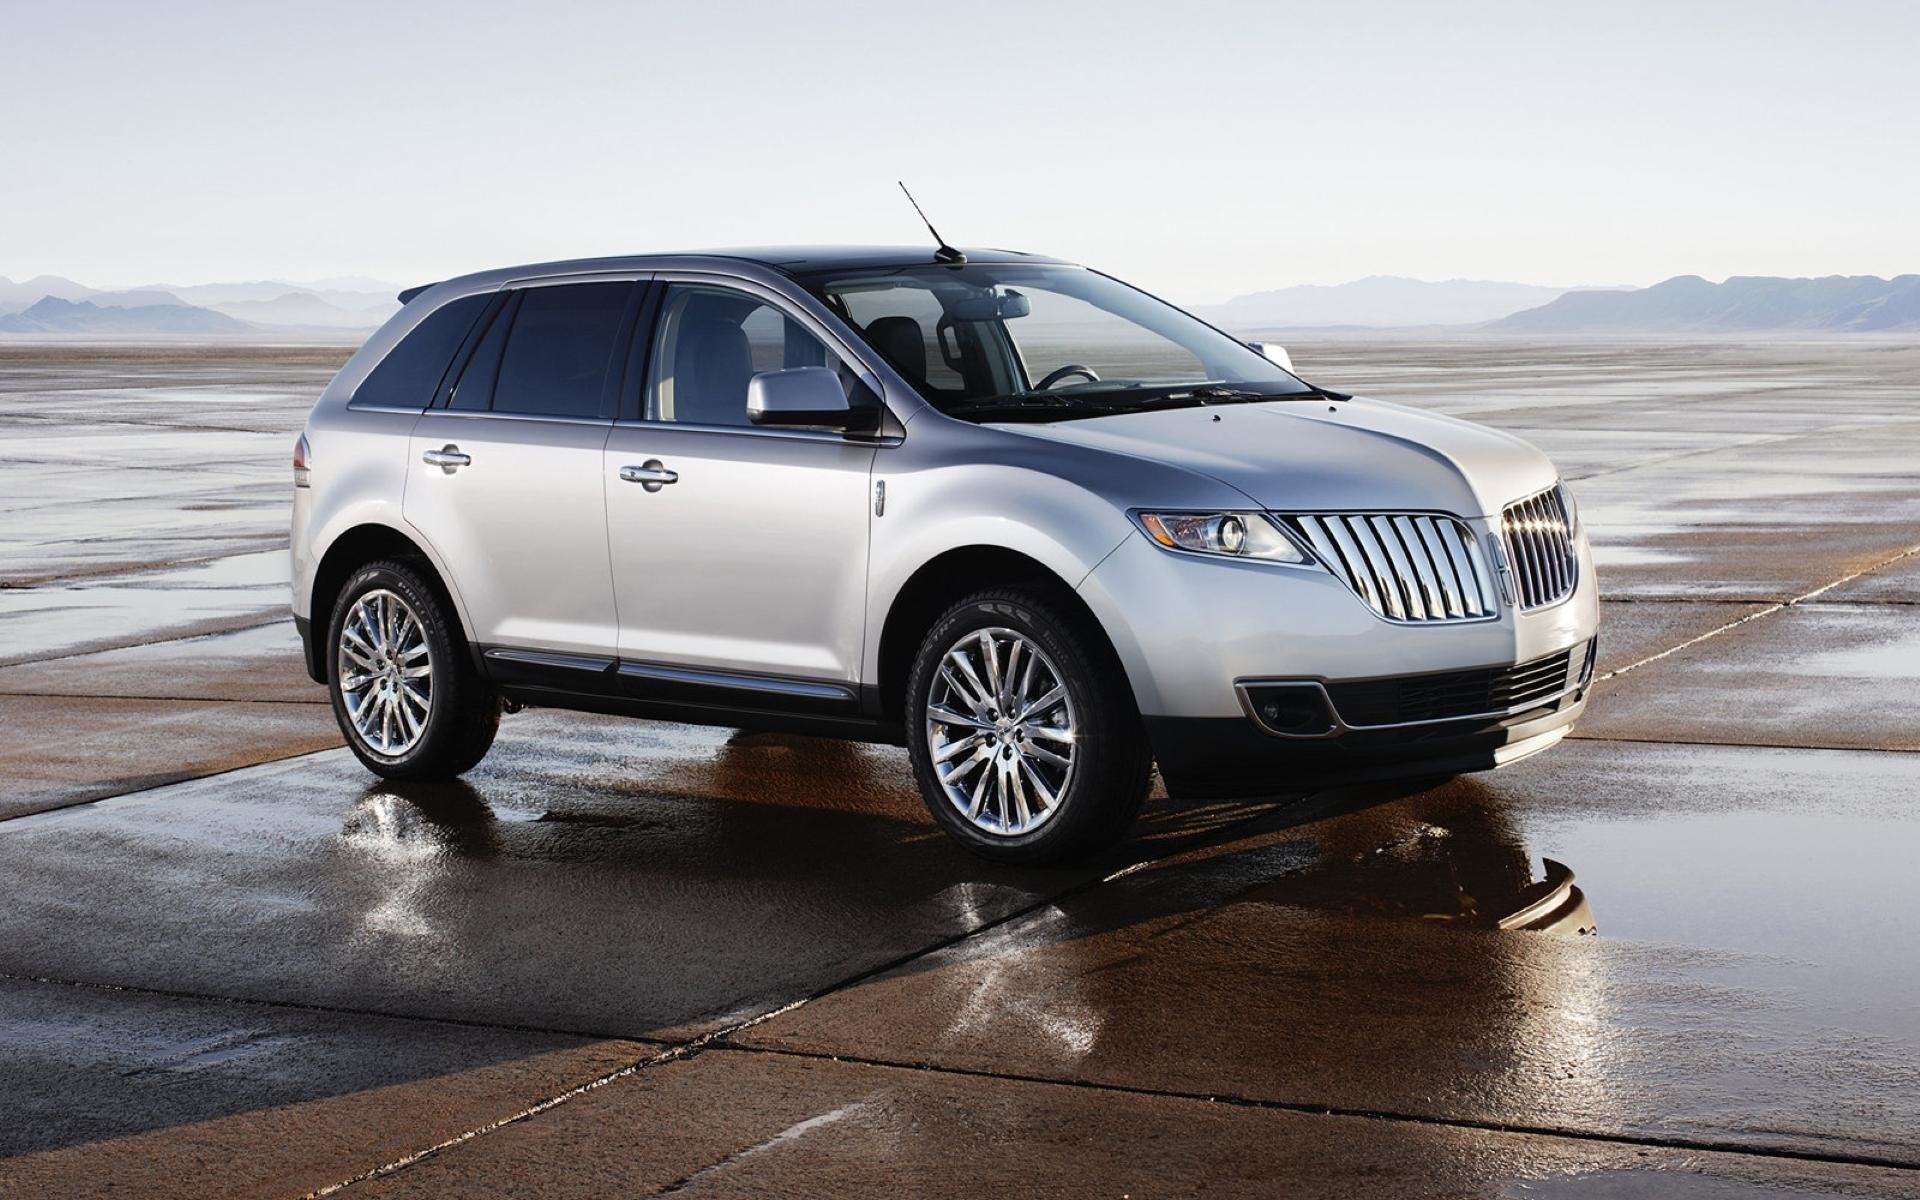 2011 Lincoln MKX - Front Quarter